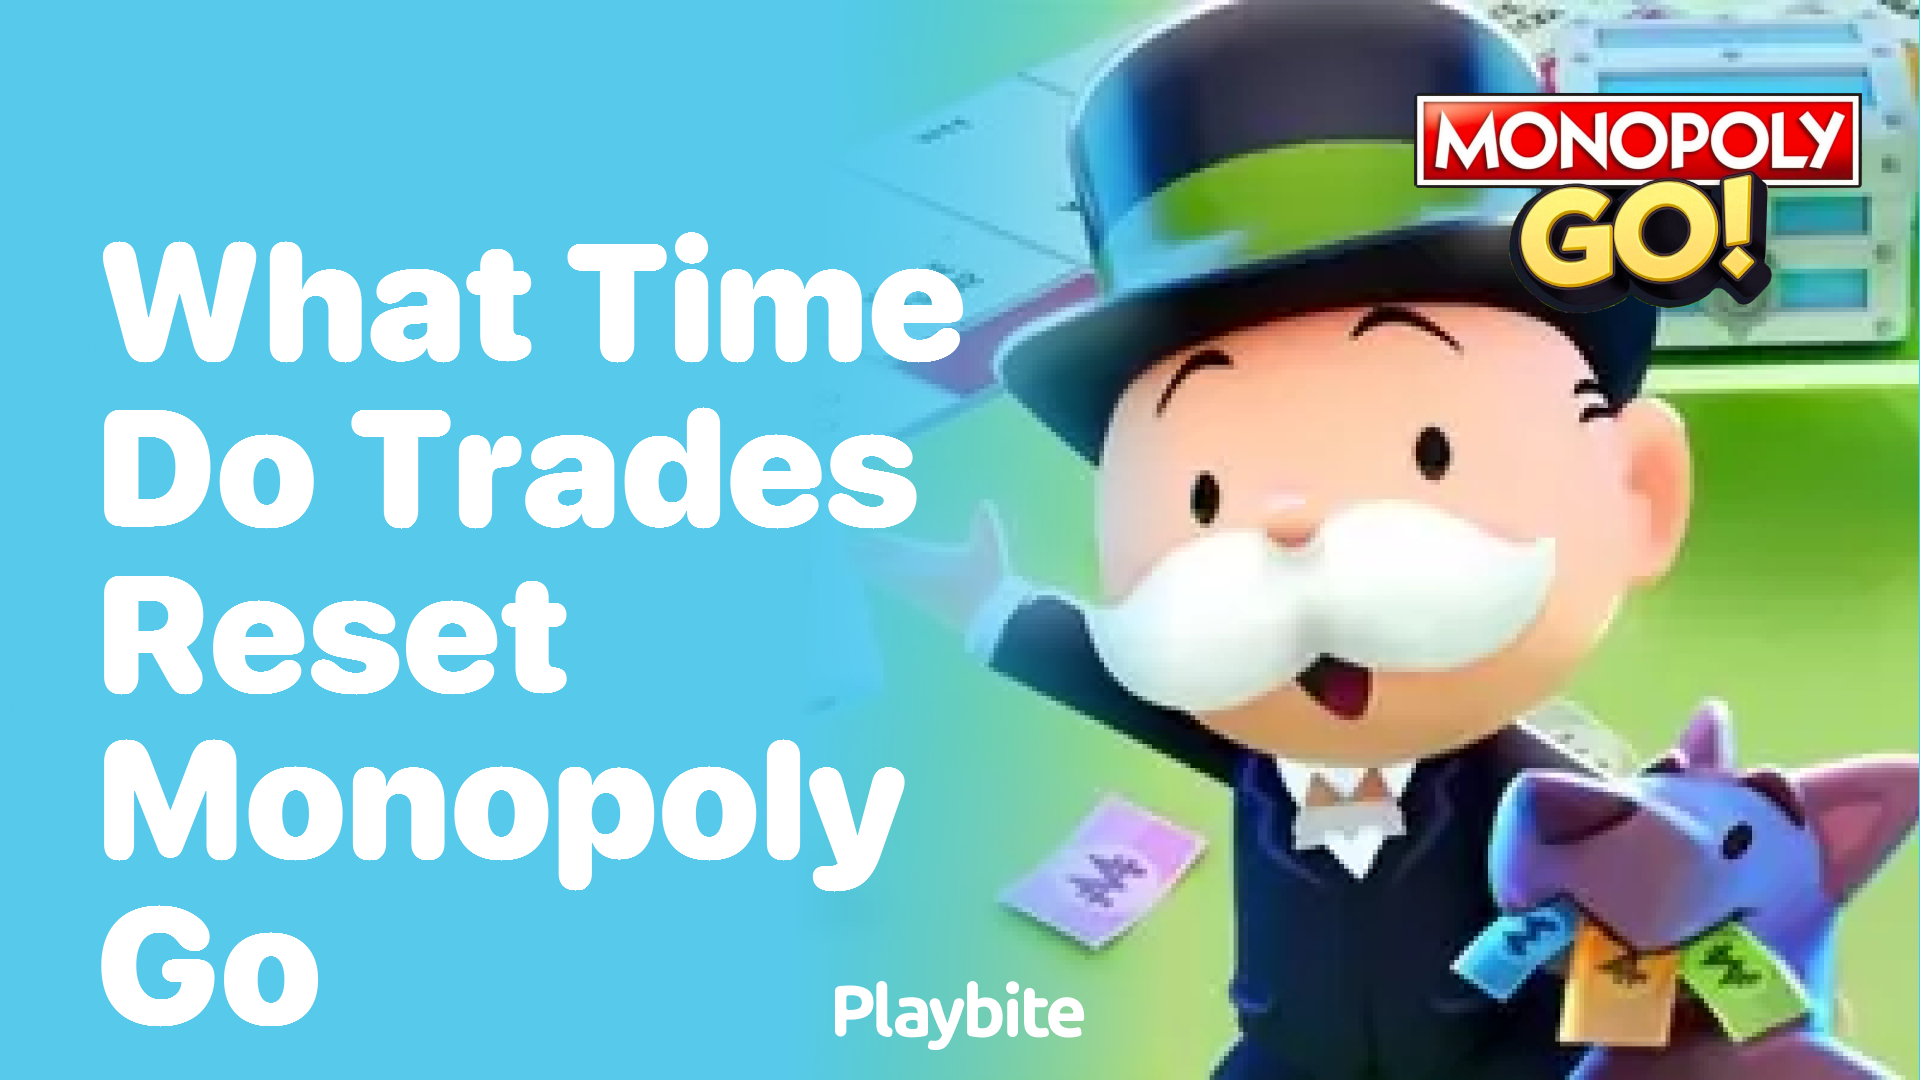 What Time Do Trades Reset in Monopoly Go?